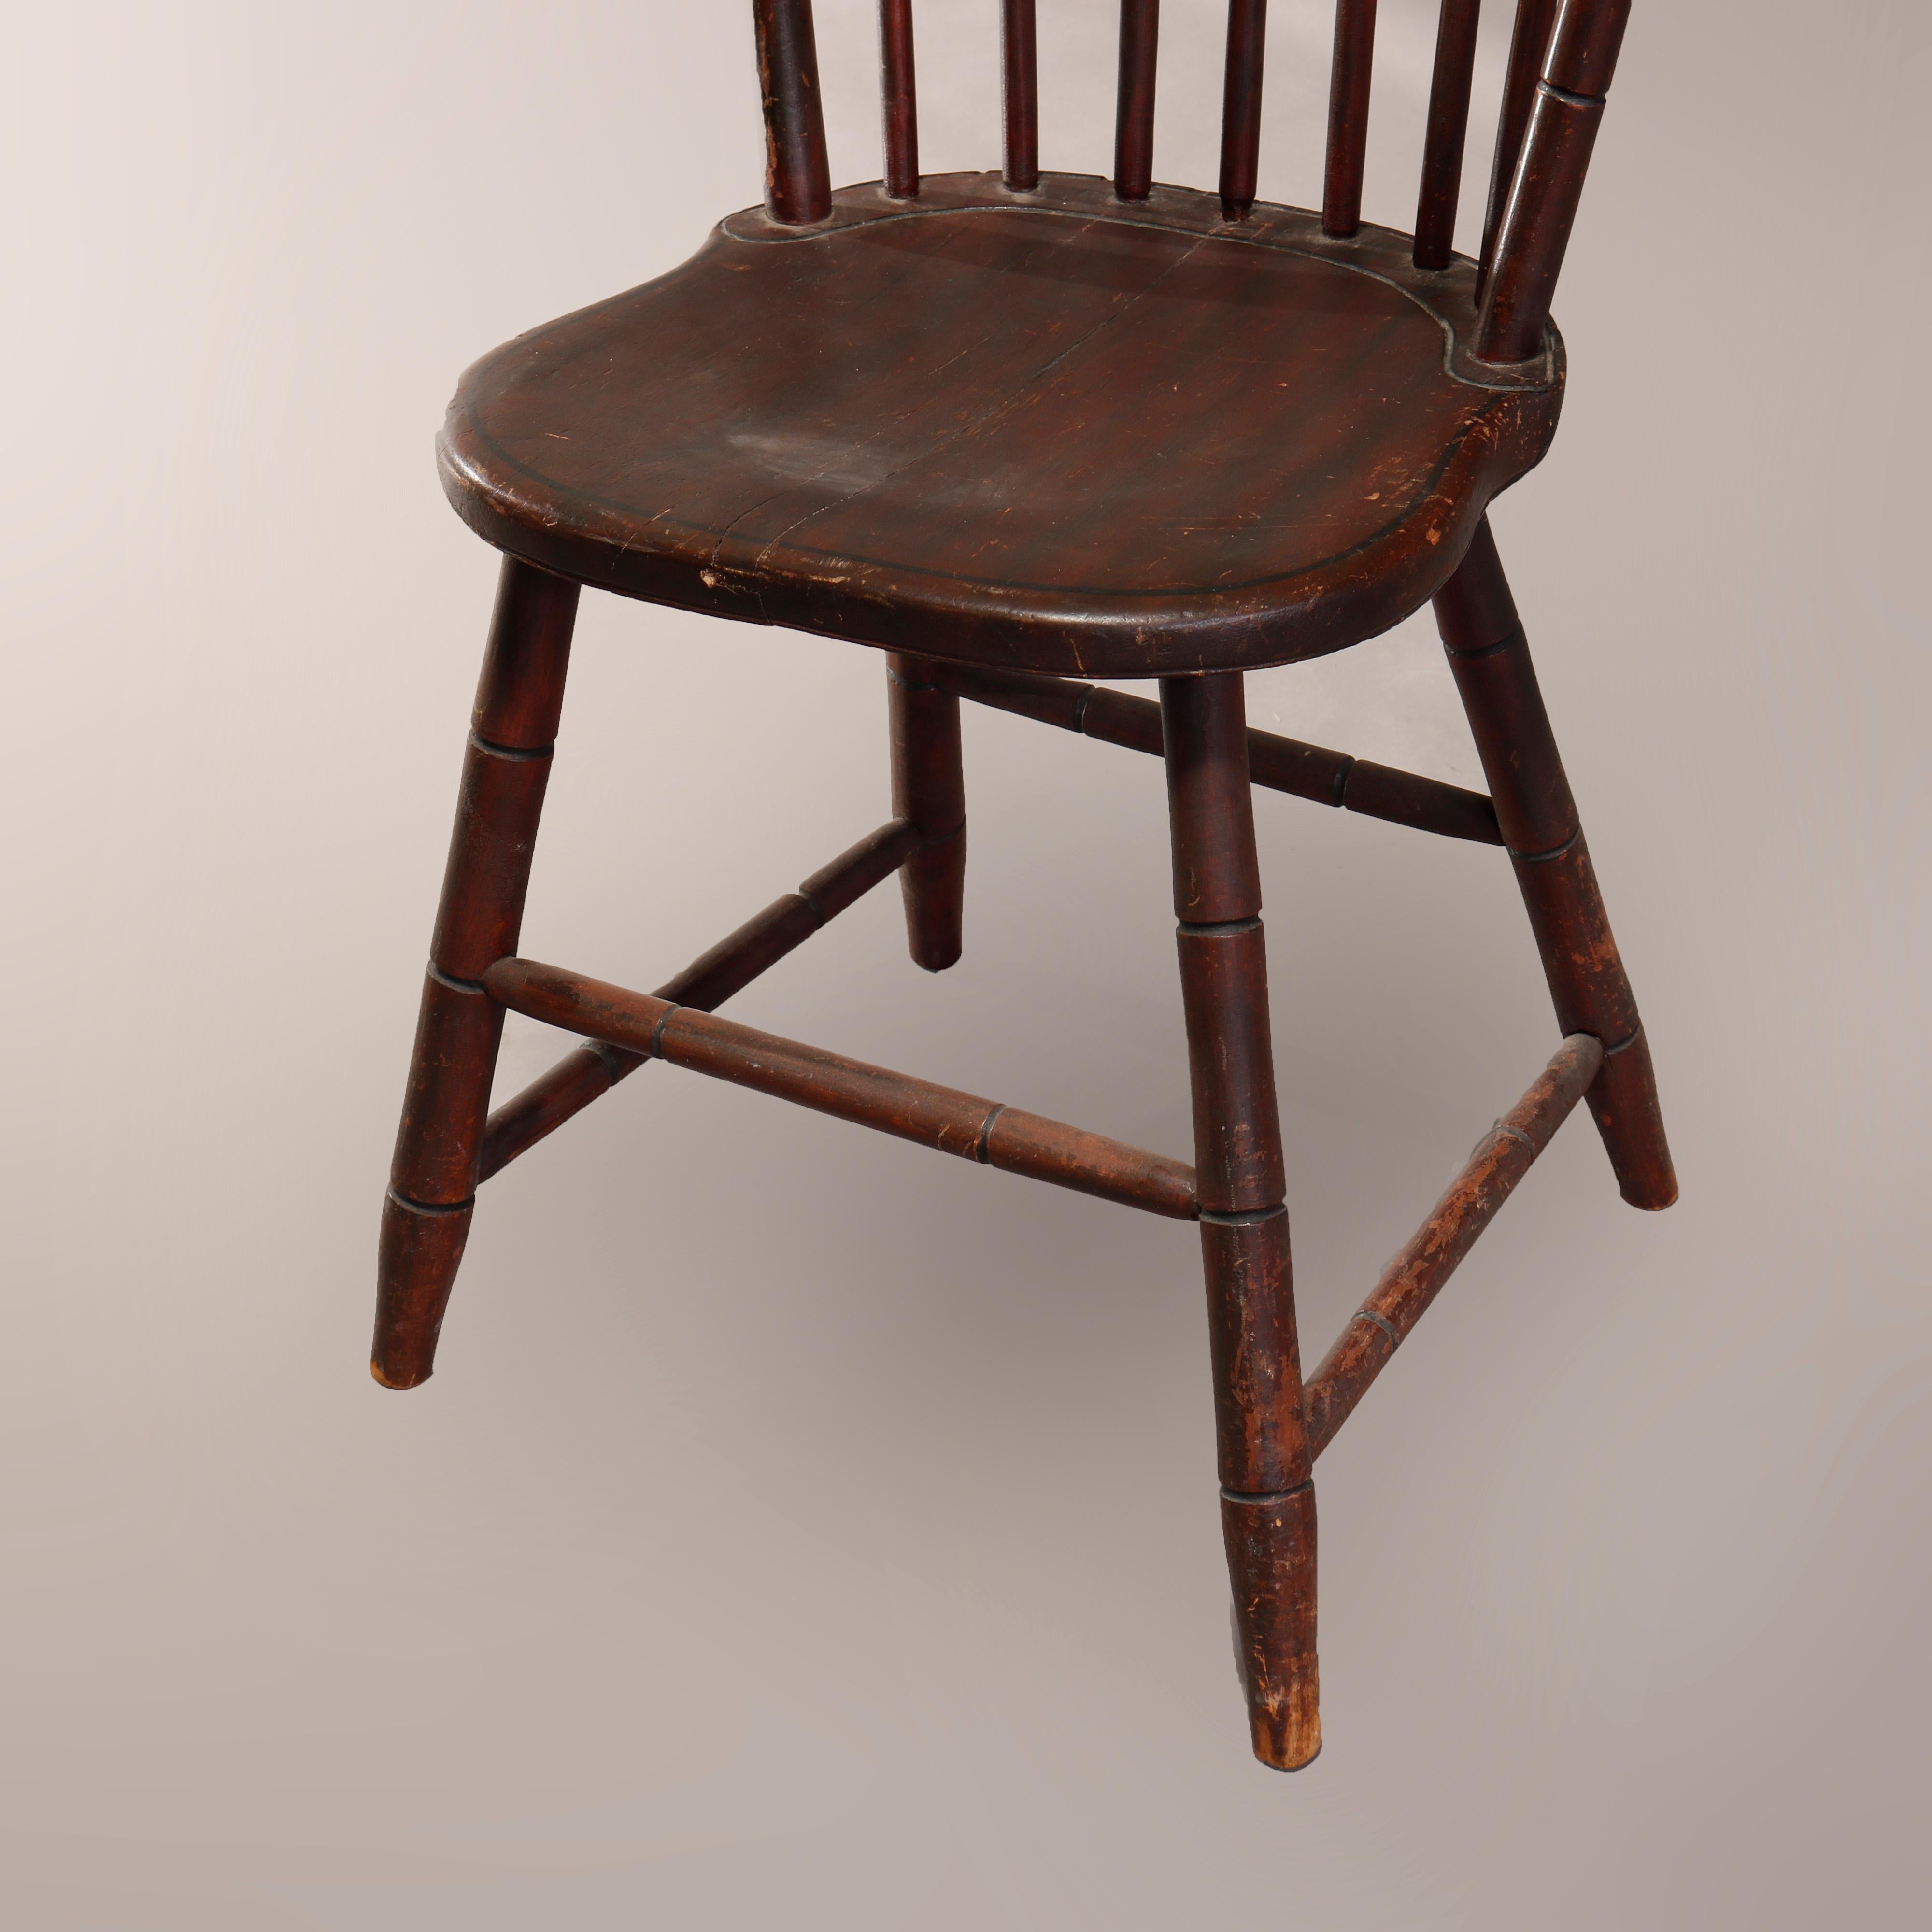 An antique early American Windsor side chair offers spindle back over seat with ebonized stenciled band, raised on turned legs, 19th century

Measures: 35